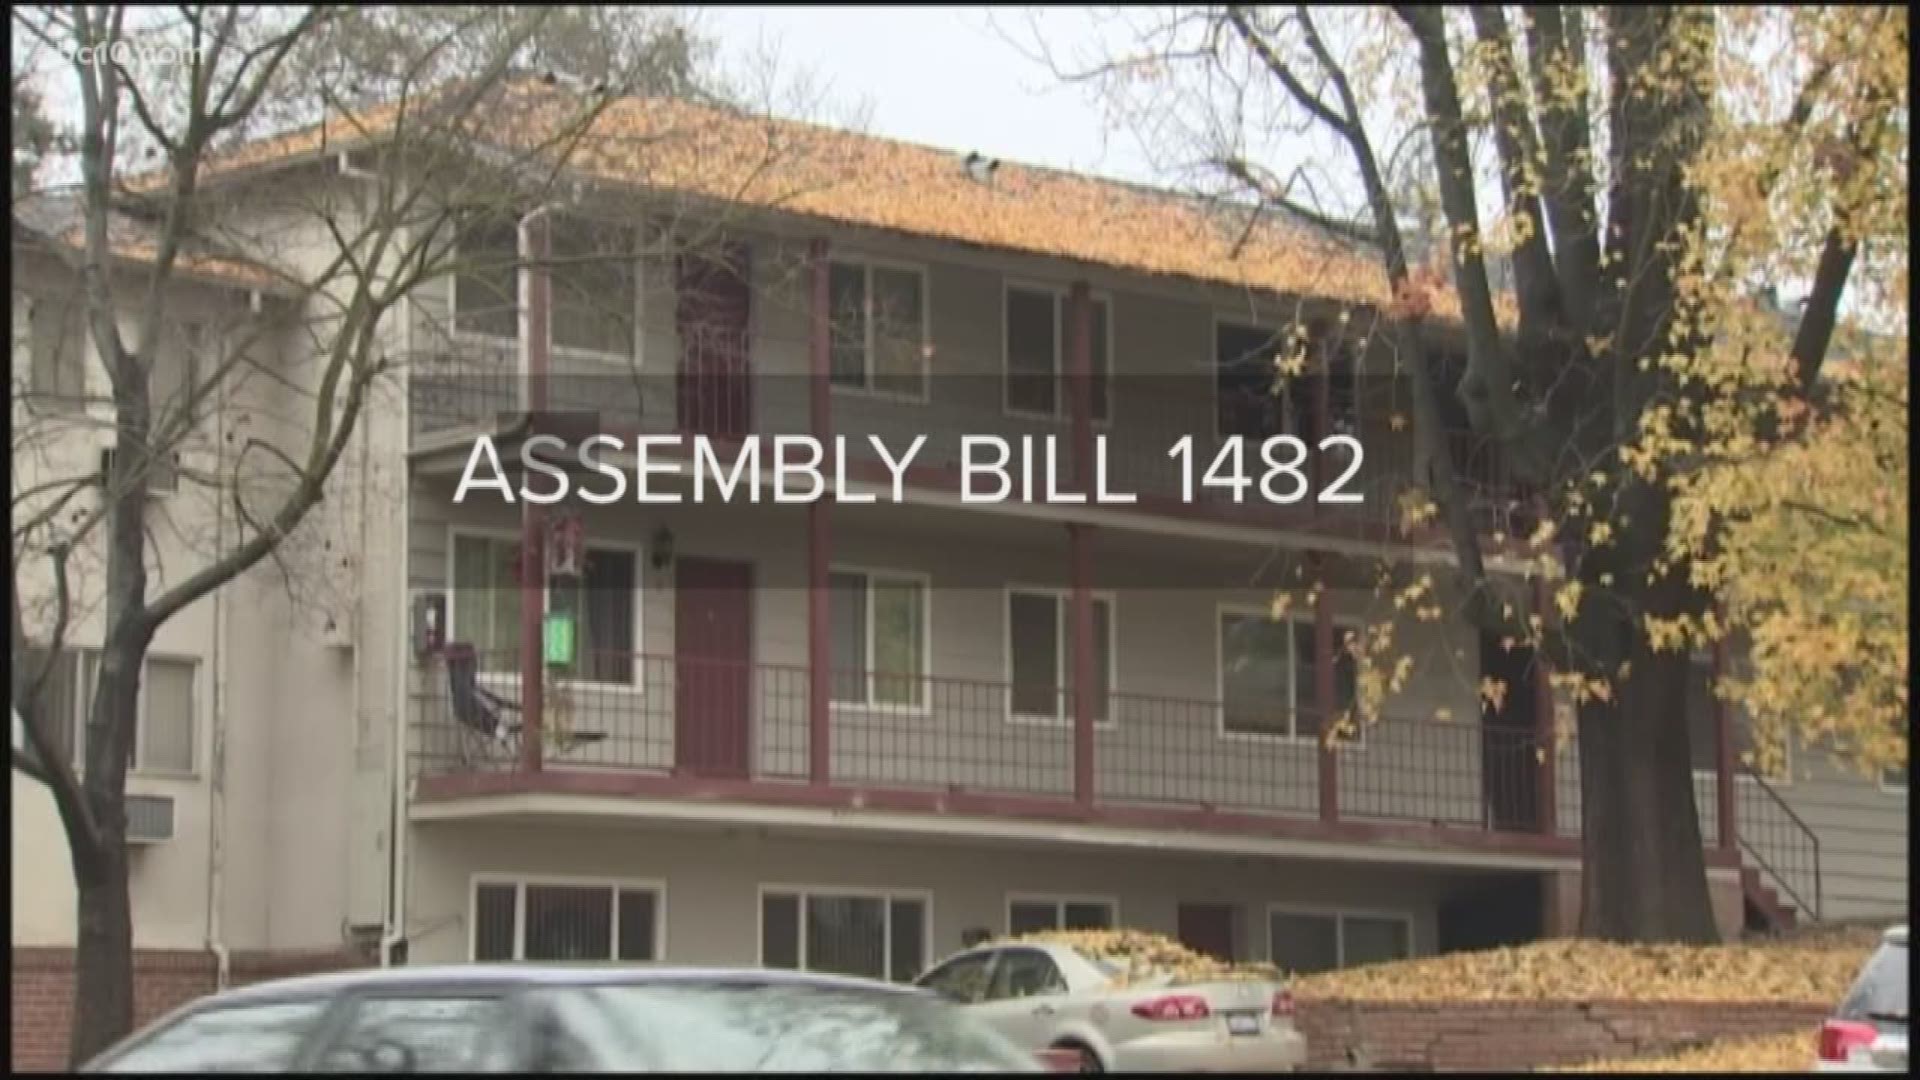 Assembly Bill 1482, which now goes to the state Senate, would prohibit landlords from raising rent by more than 7-percent plus inflation over the course of a year.